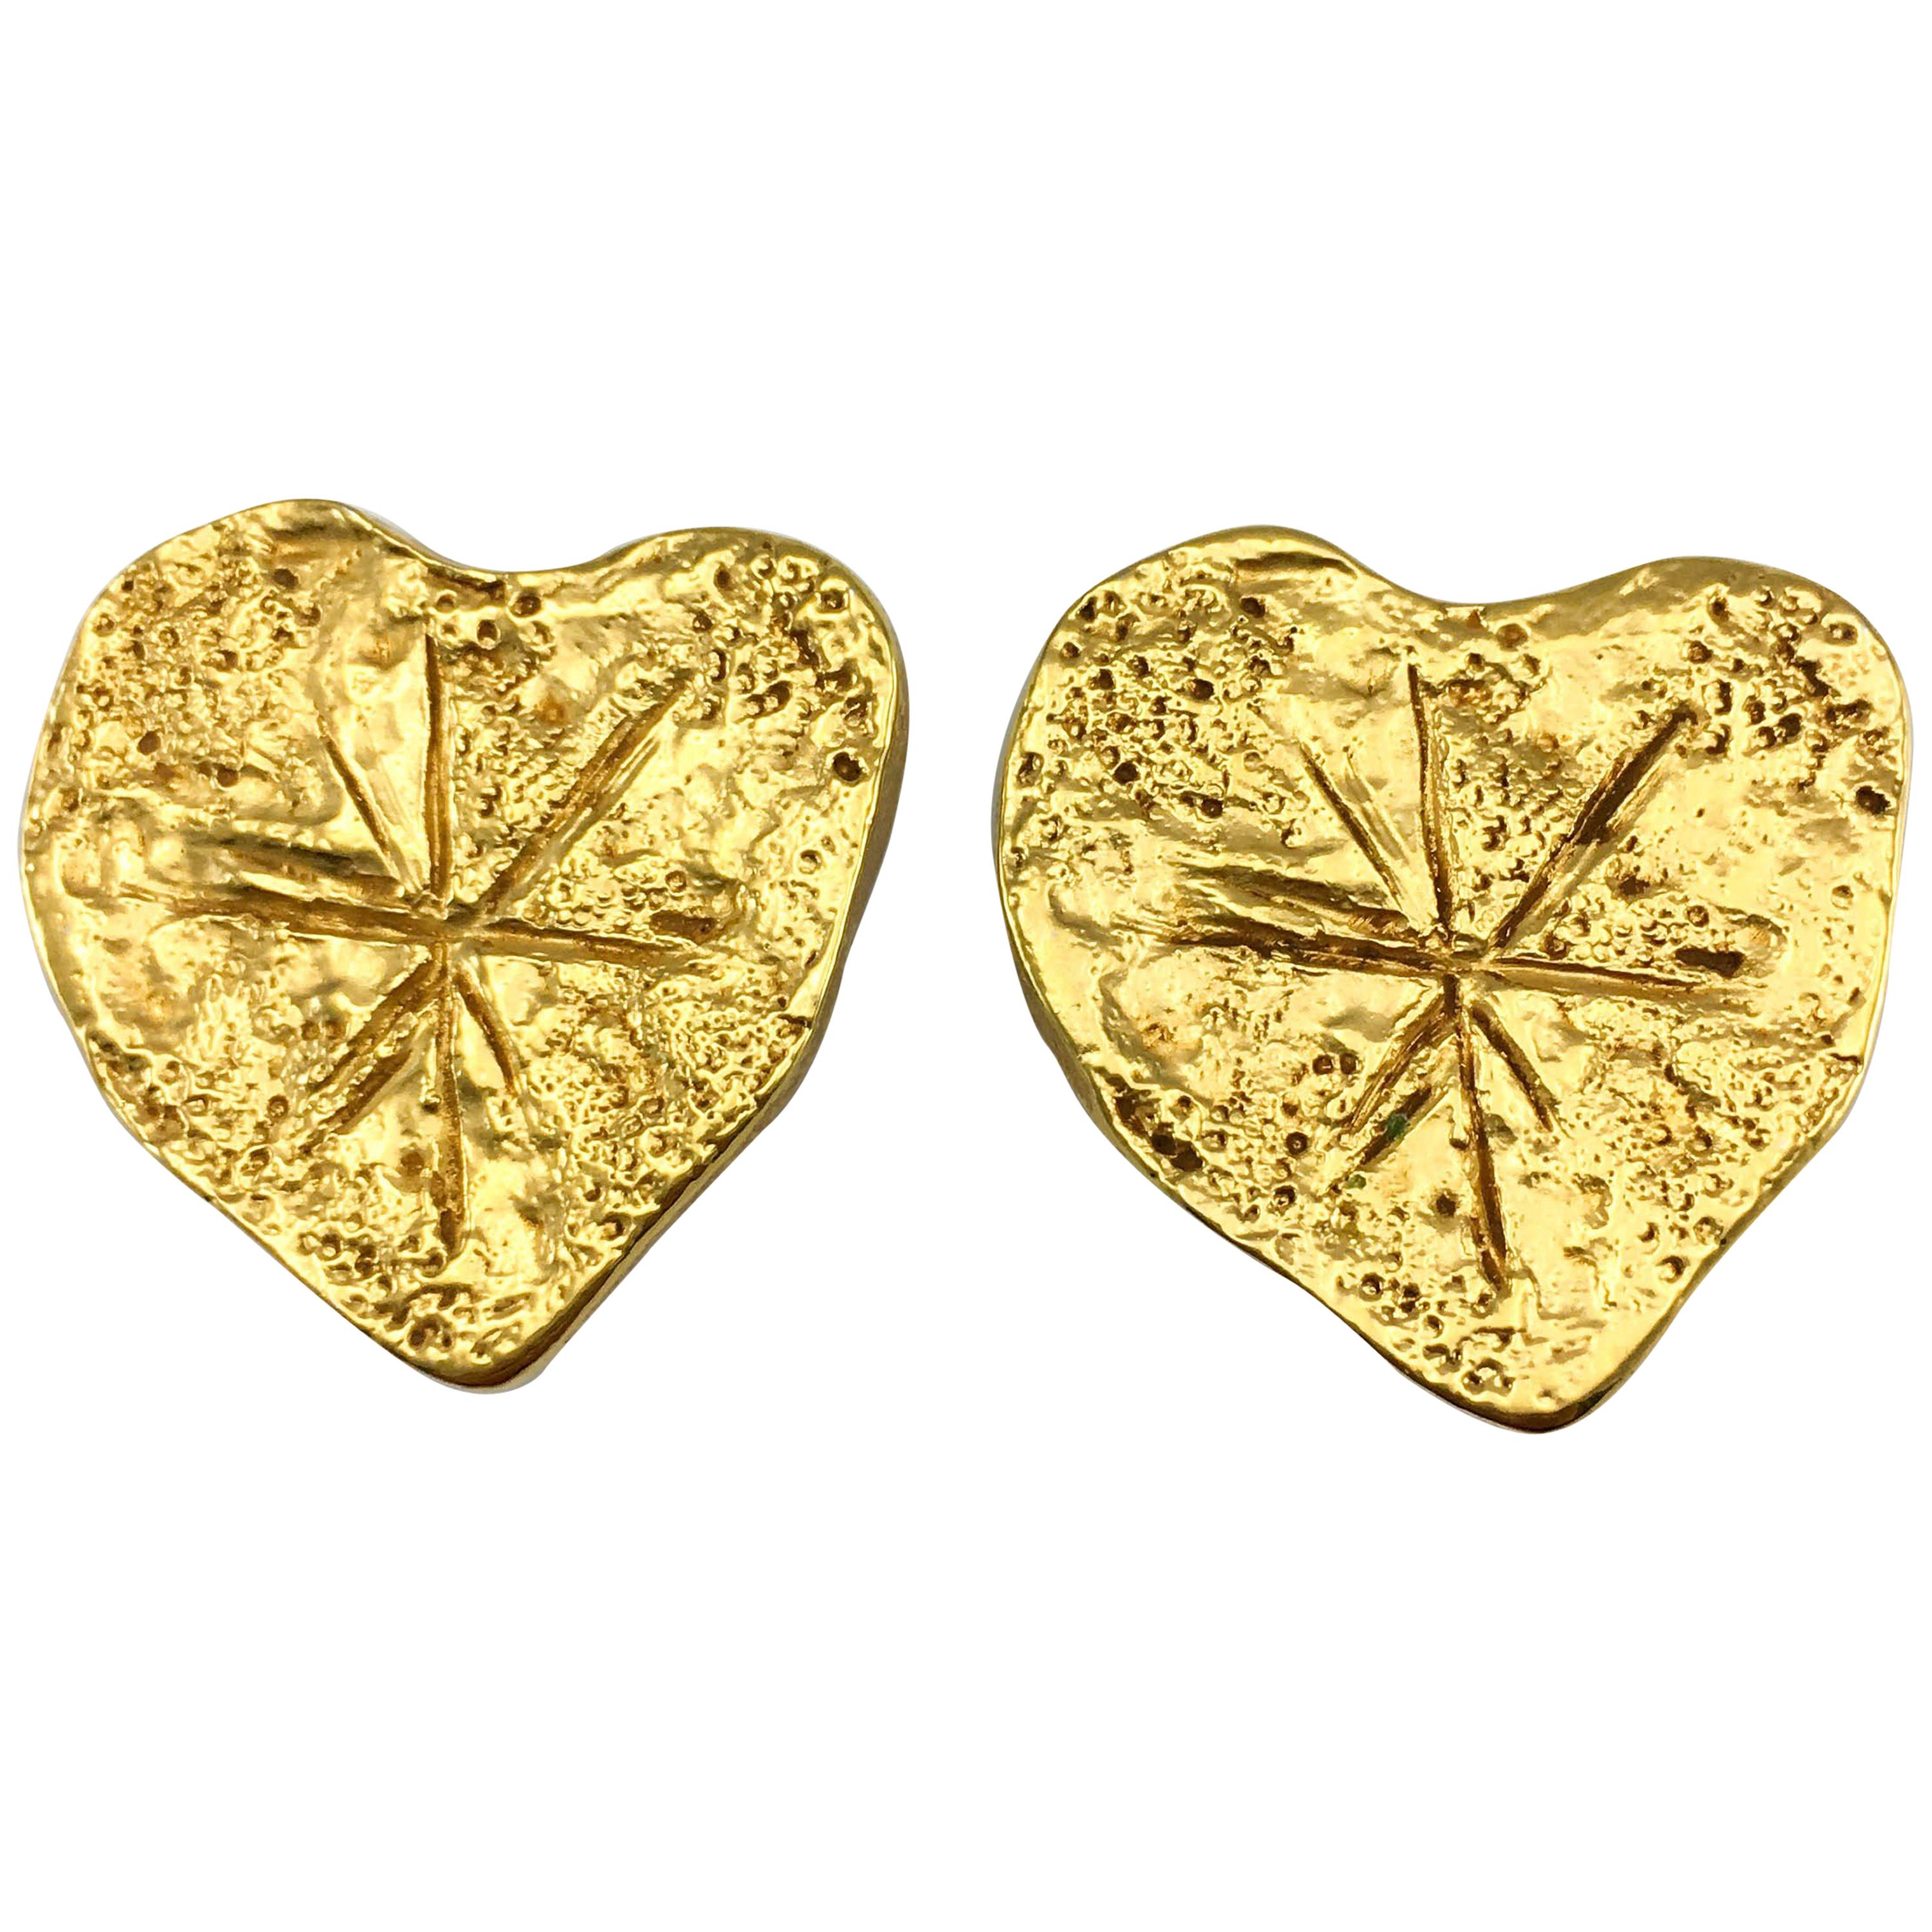 1994 Christian Lacroix Gold-Plated Modernist Heart Earrings For Sale